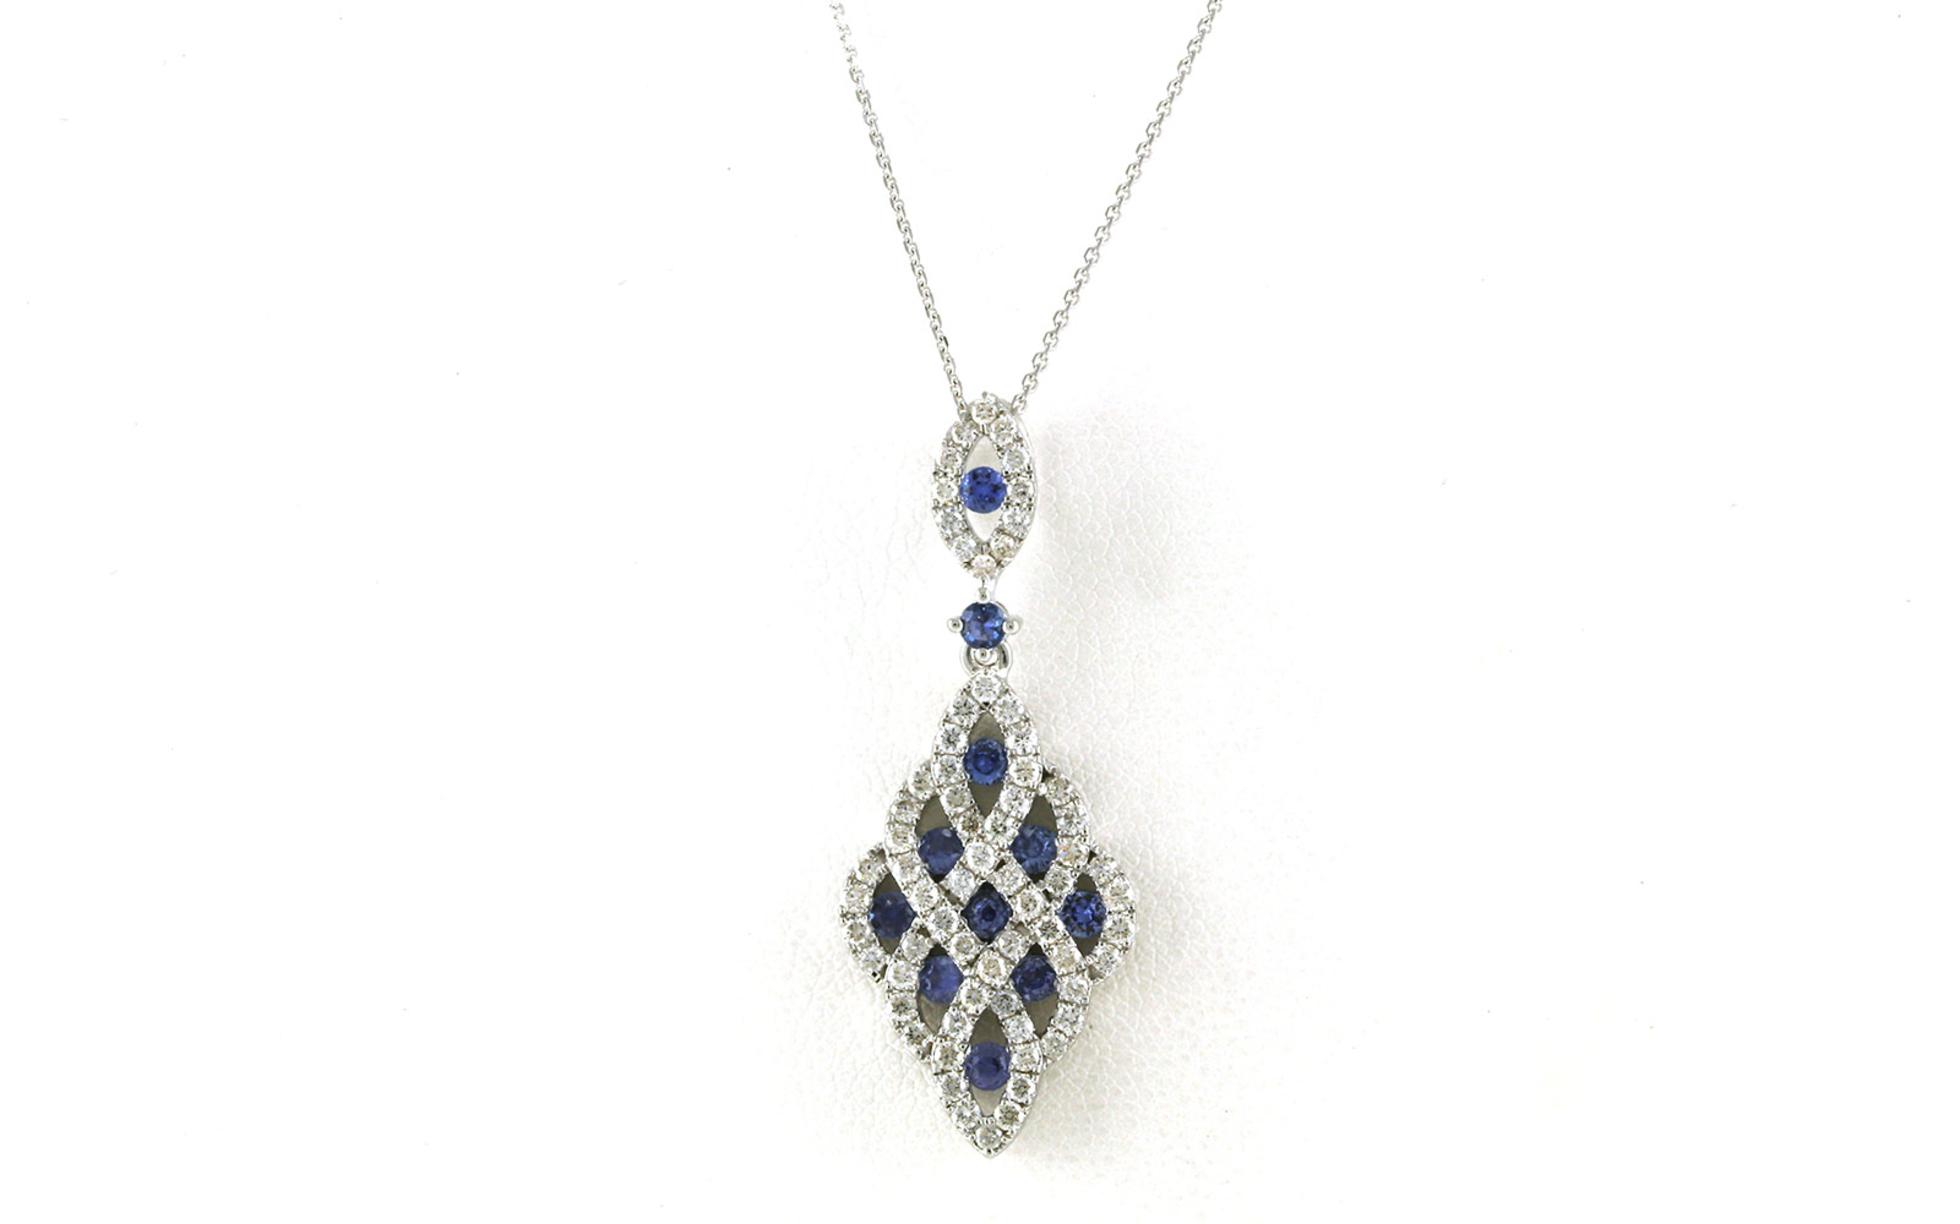 Woven Fan Montana Yogo Sapphire and Diamond Necklace in White Gold (1.48cts TWT)